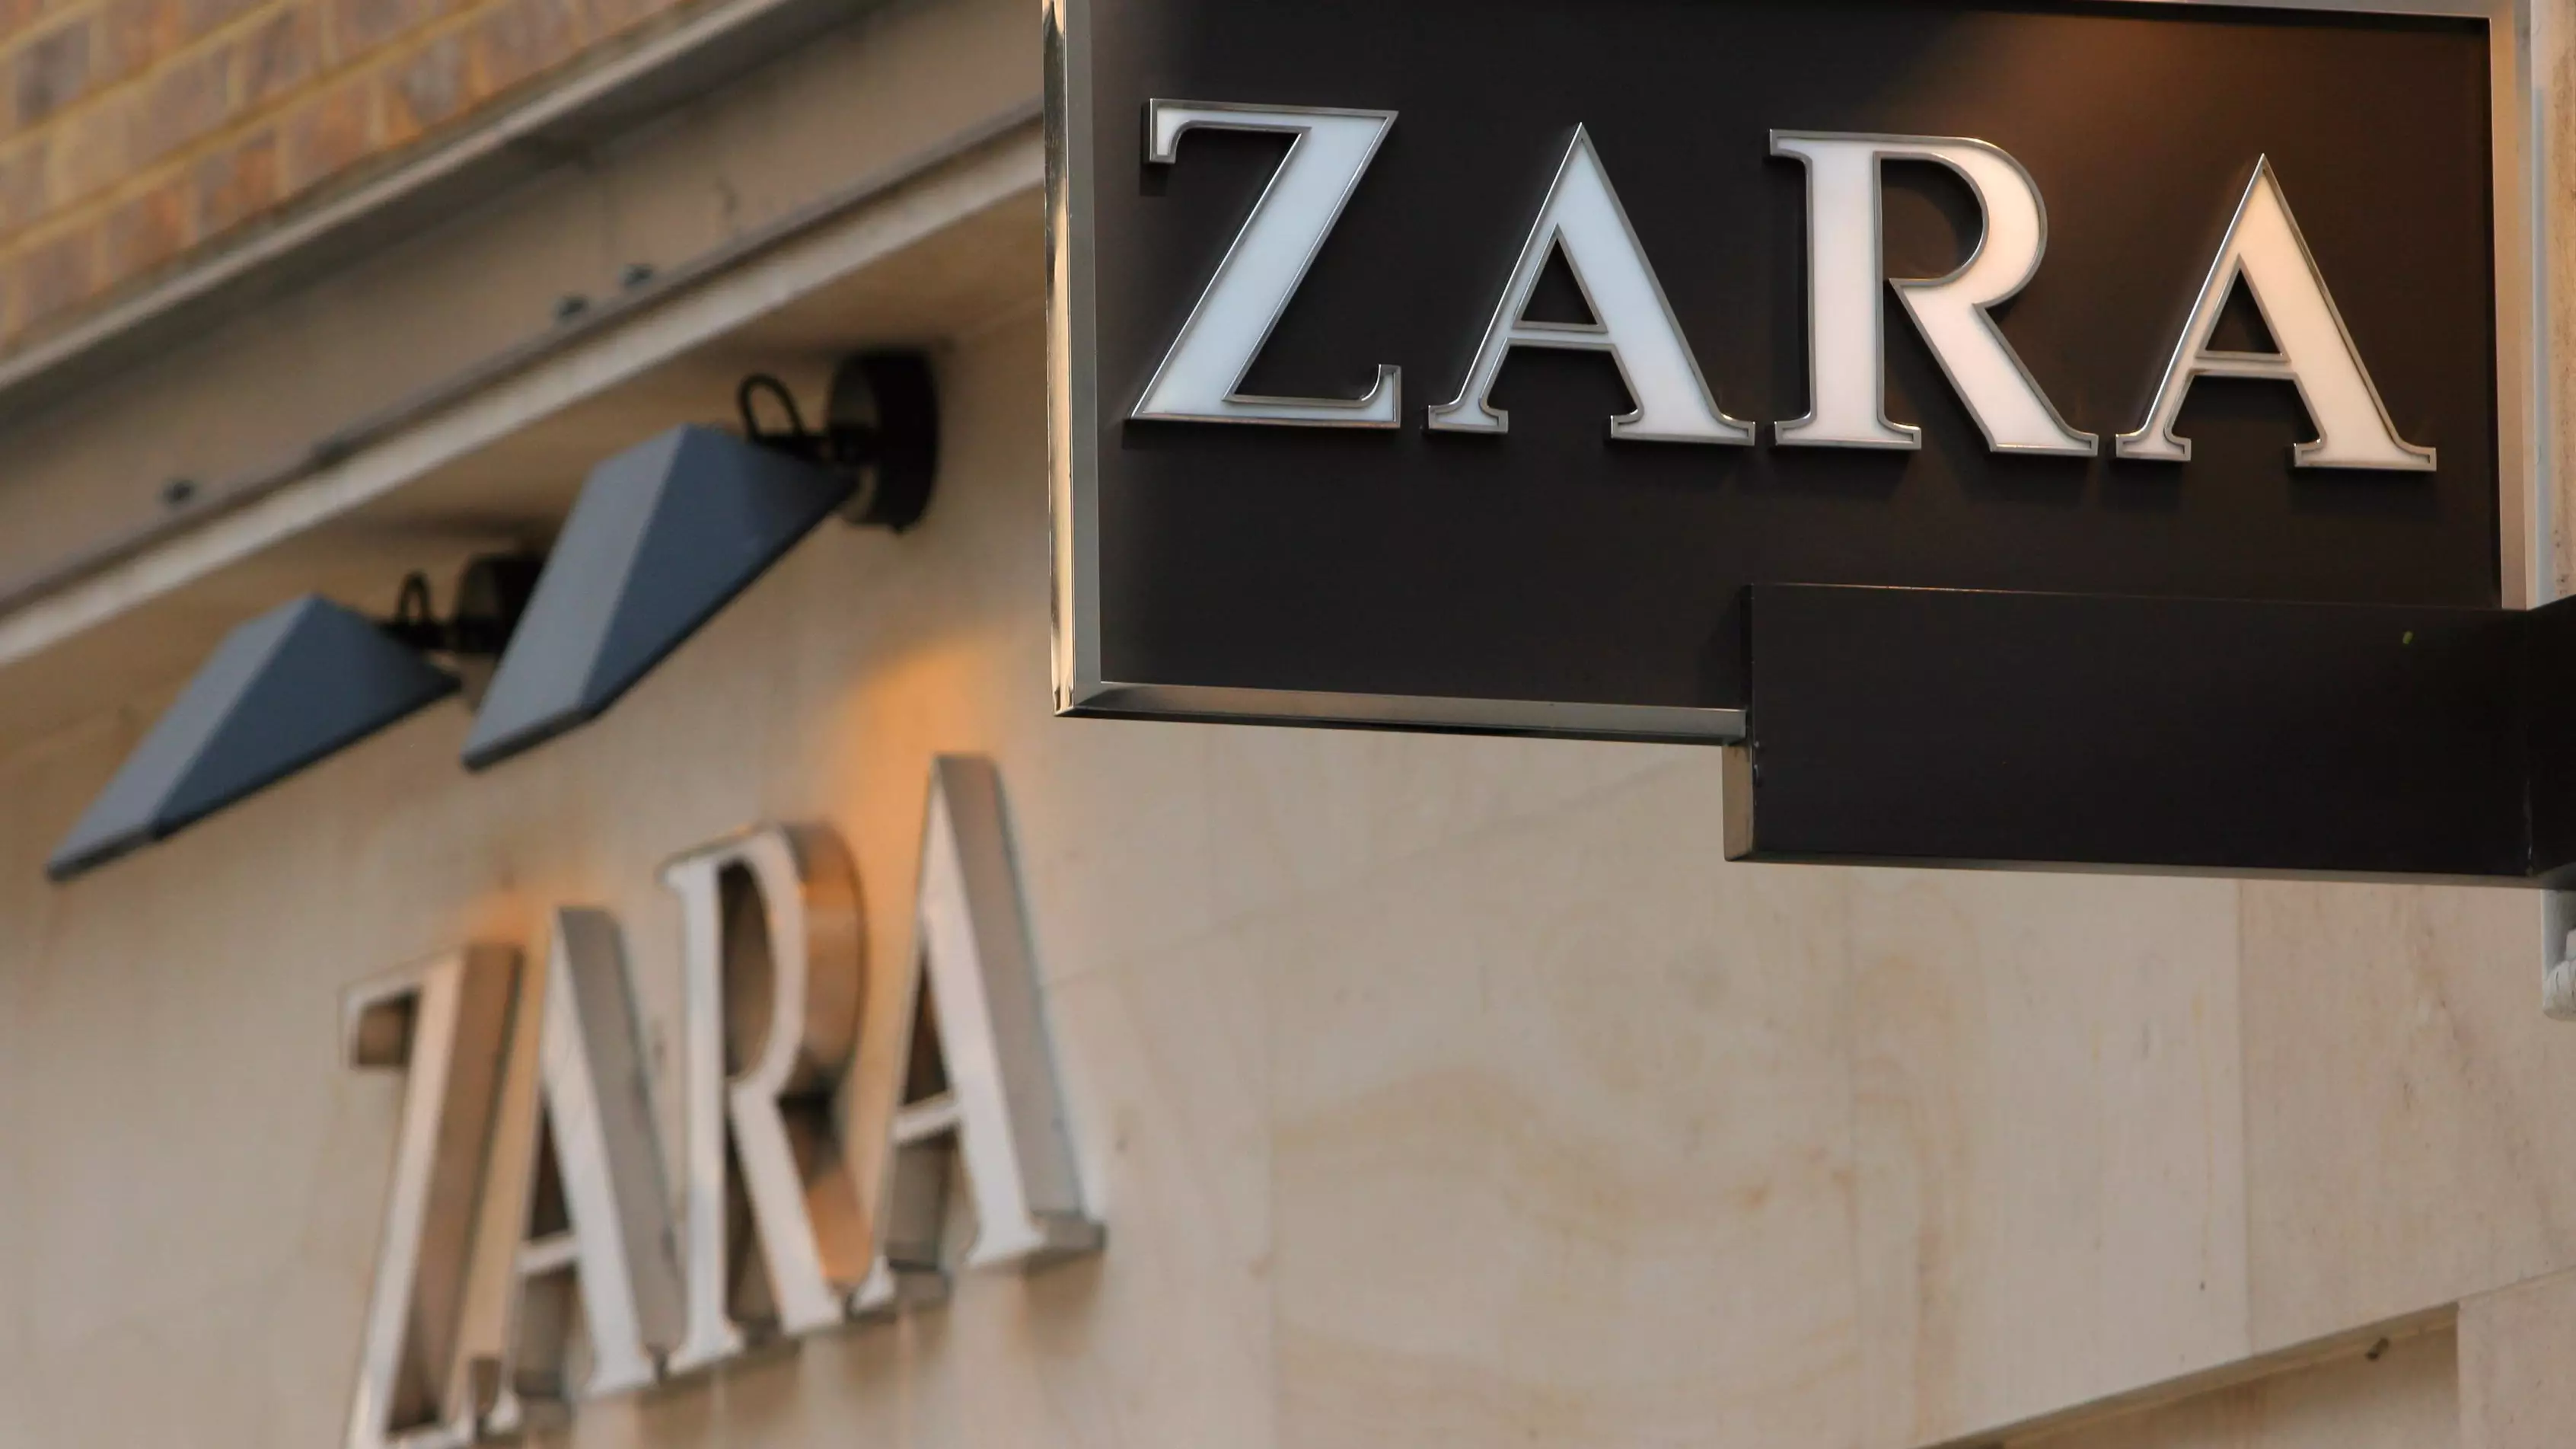 Messages Have Reportedly Been Stitched Into Zara Garments From Unpaid Workers 